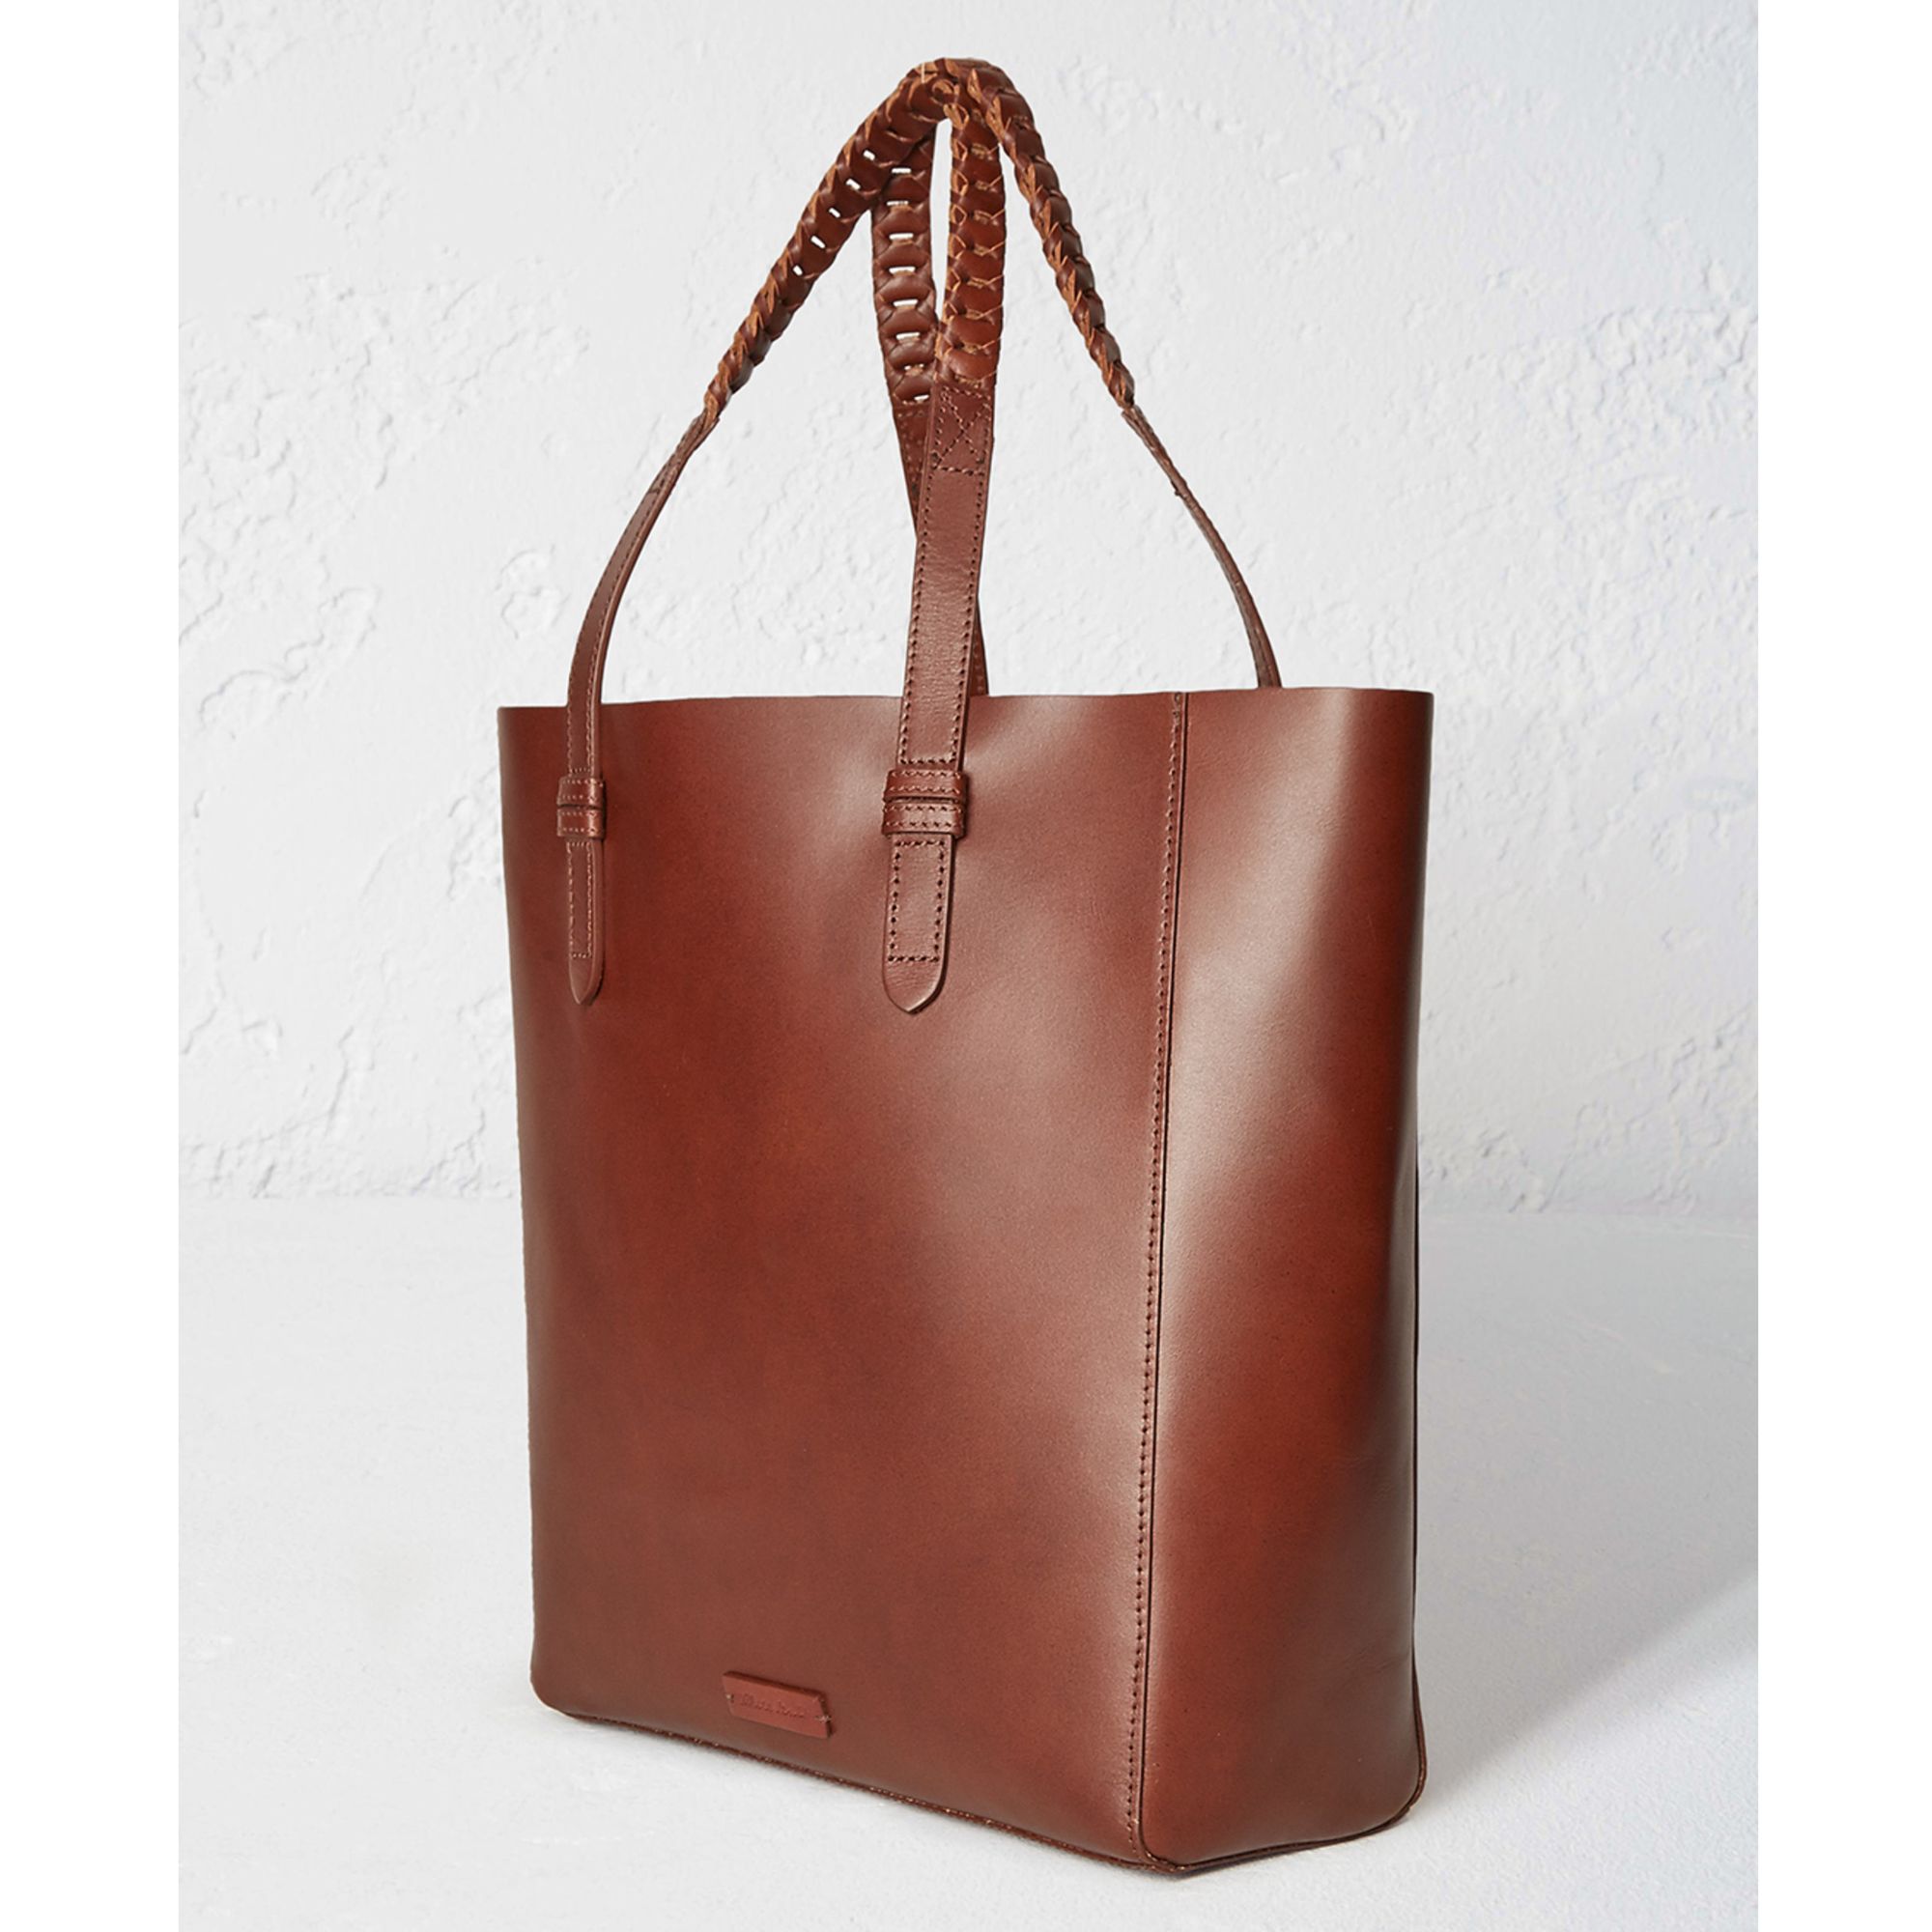 White Stuff Classic Leather Tote Bag at John Lewis & Partners